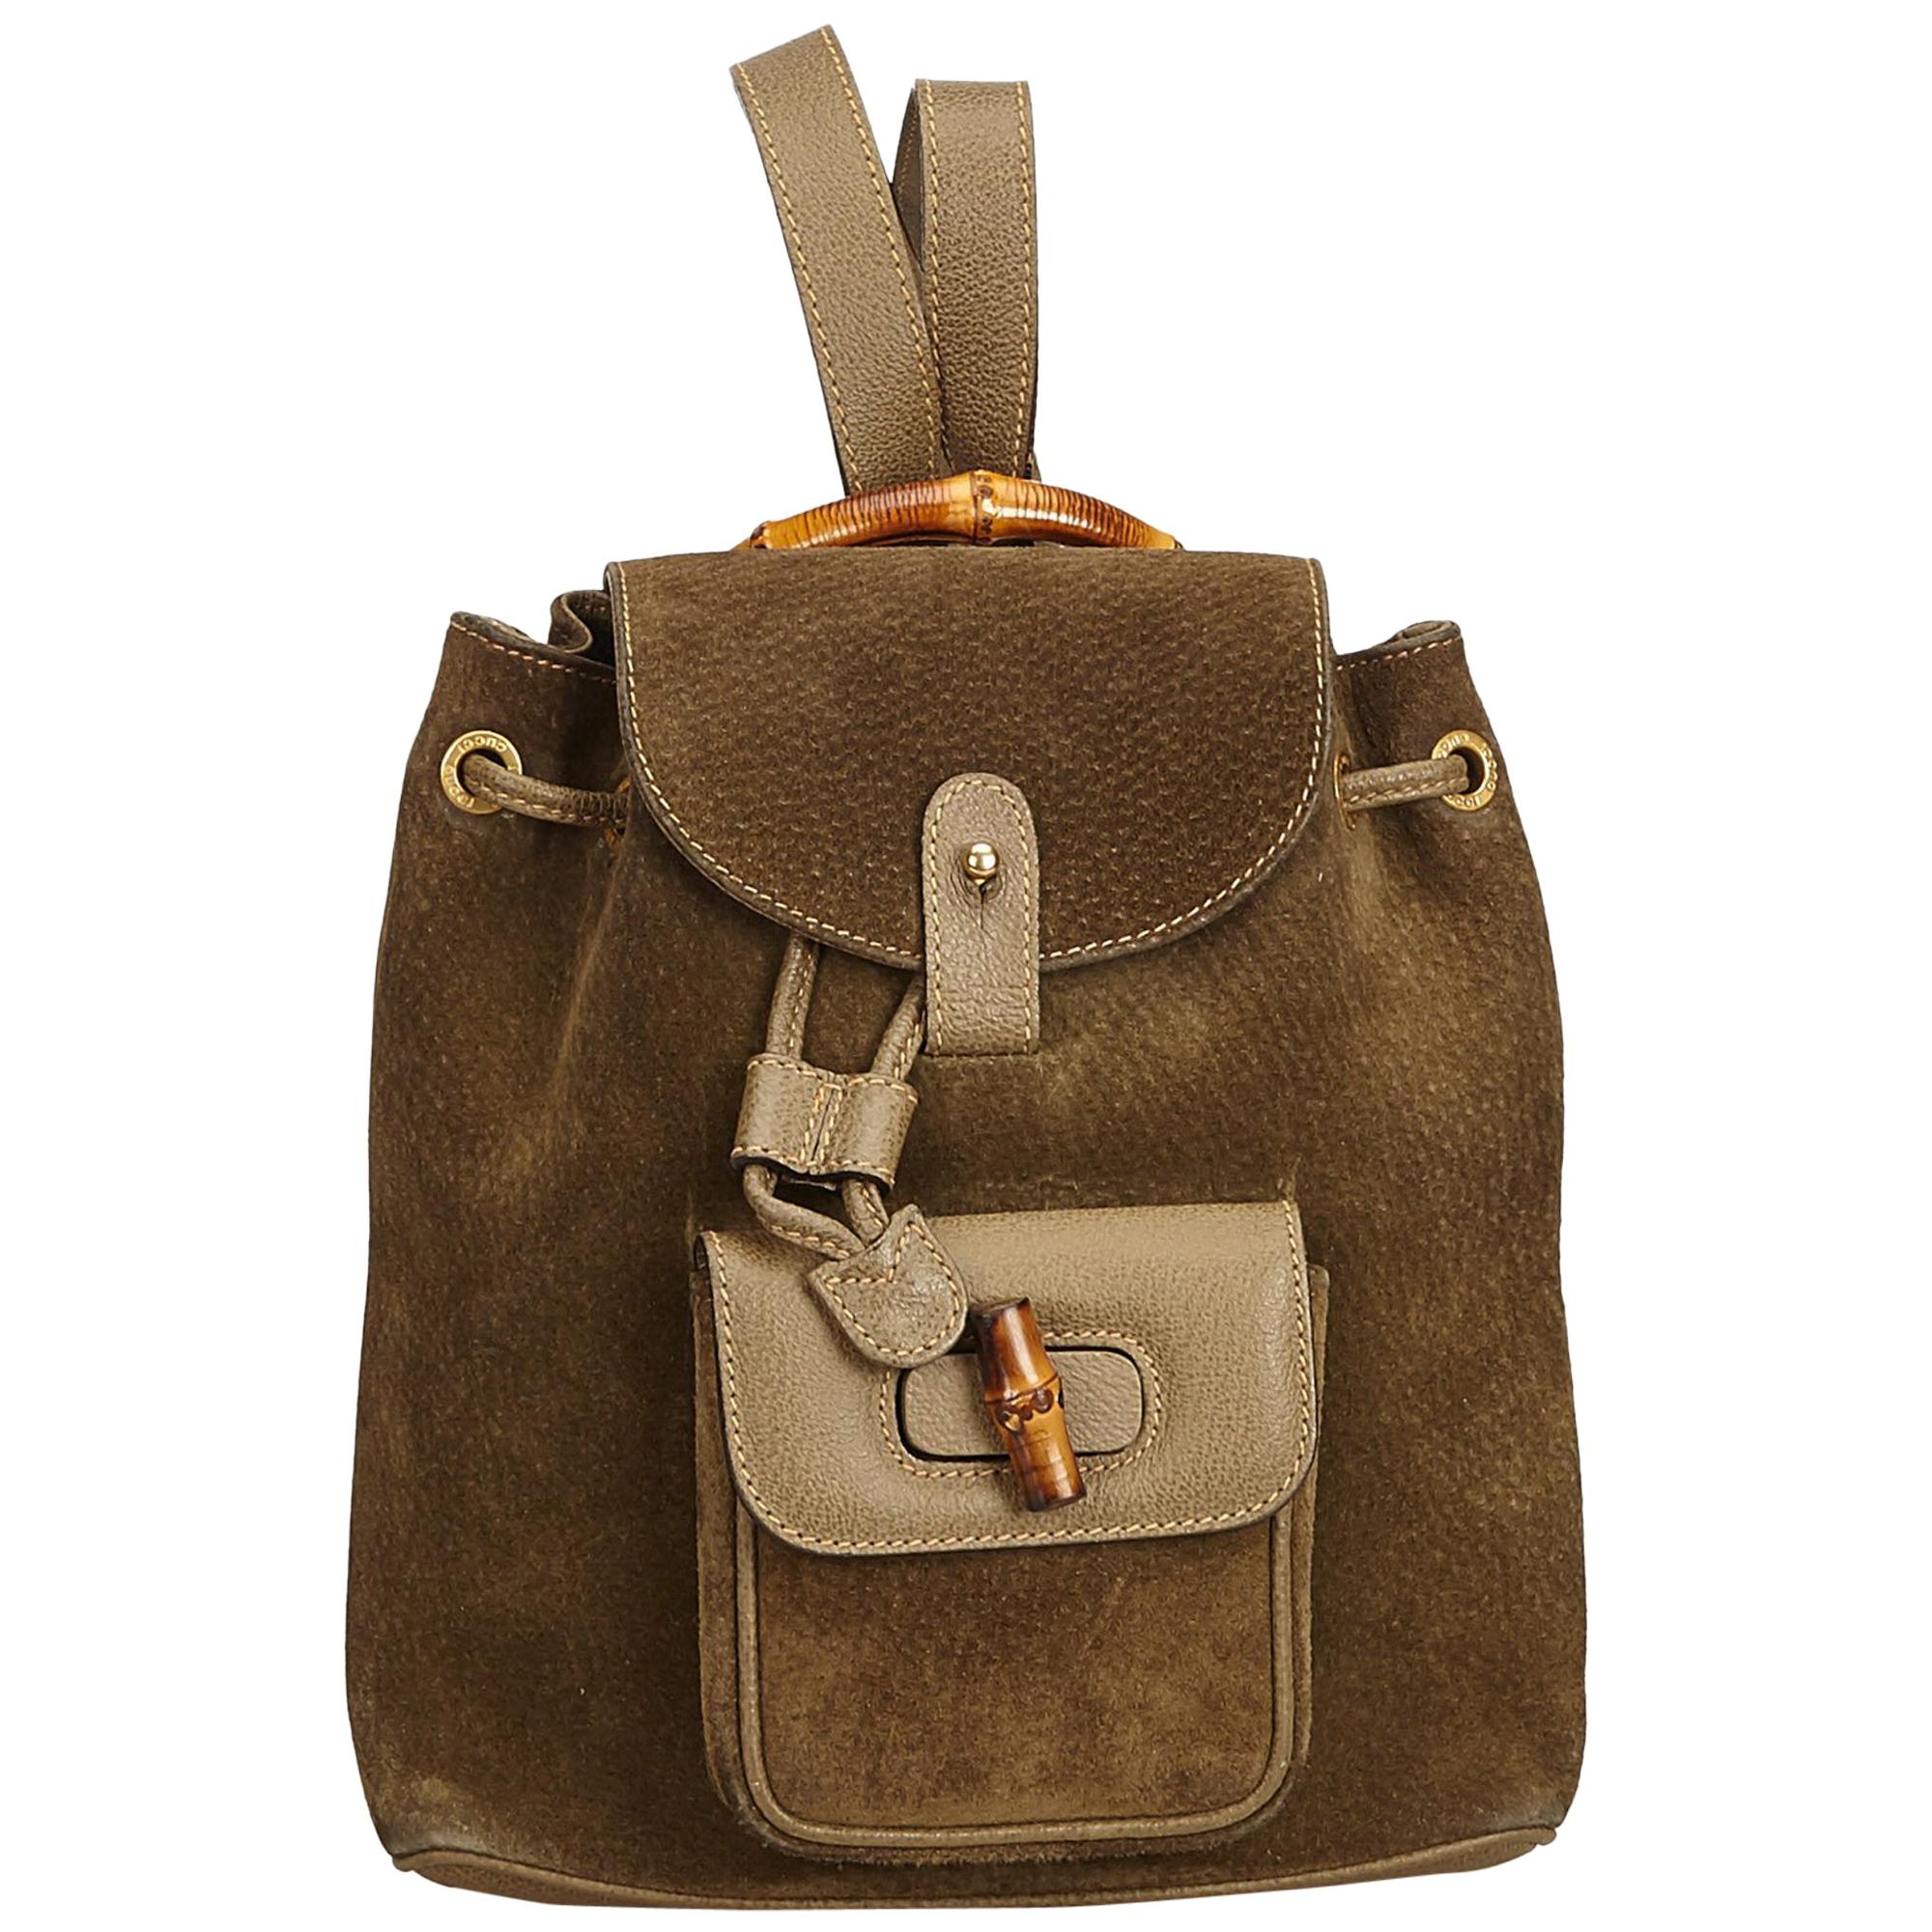 Gucci Brown Bamboo Suede Drawstring Backpack